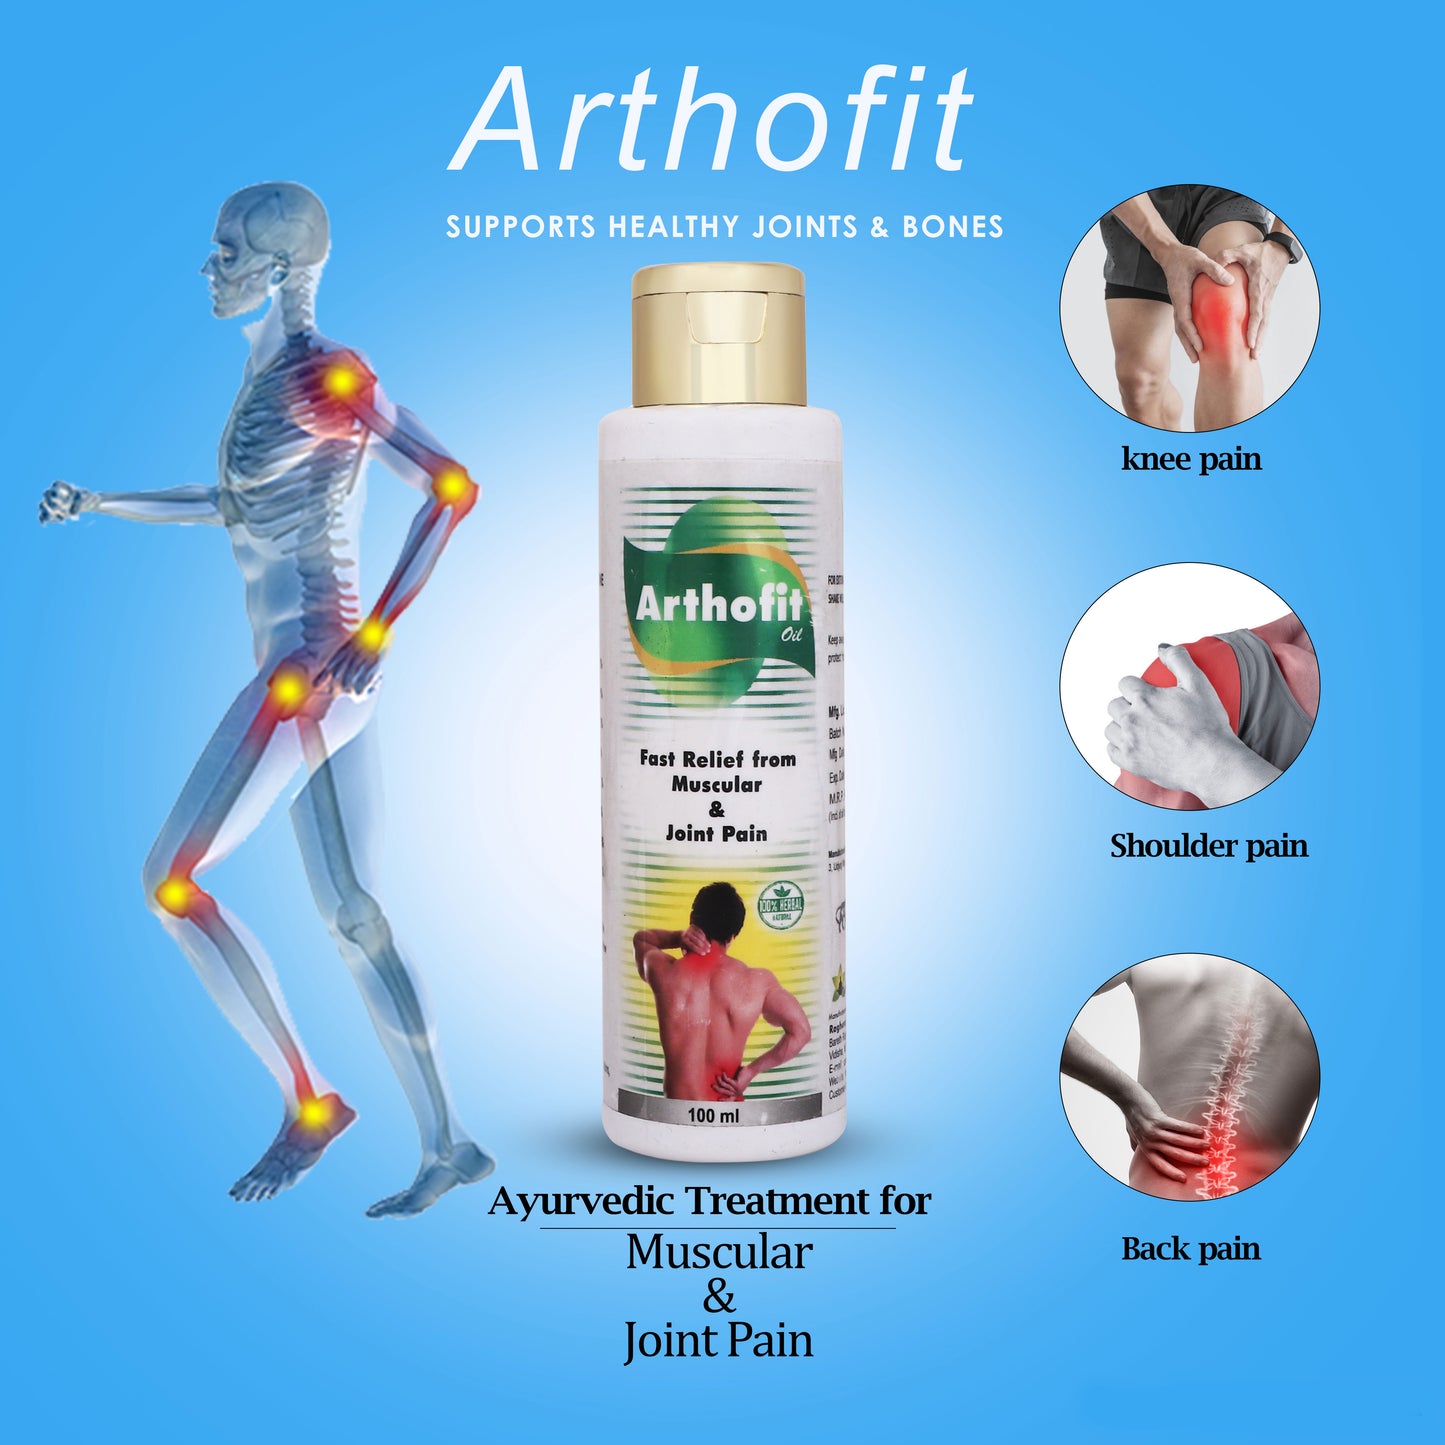 Orthofit Oil Fast Relief From Muscular & Joint Pain - 100ml